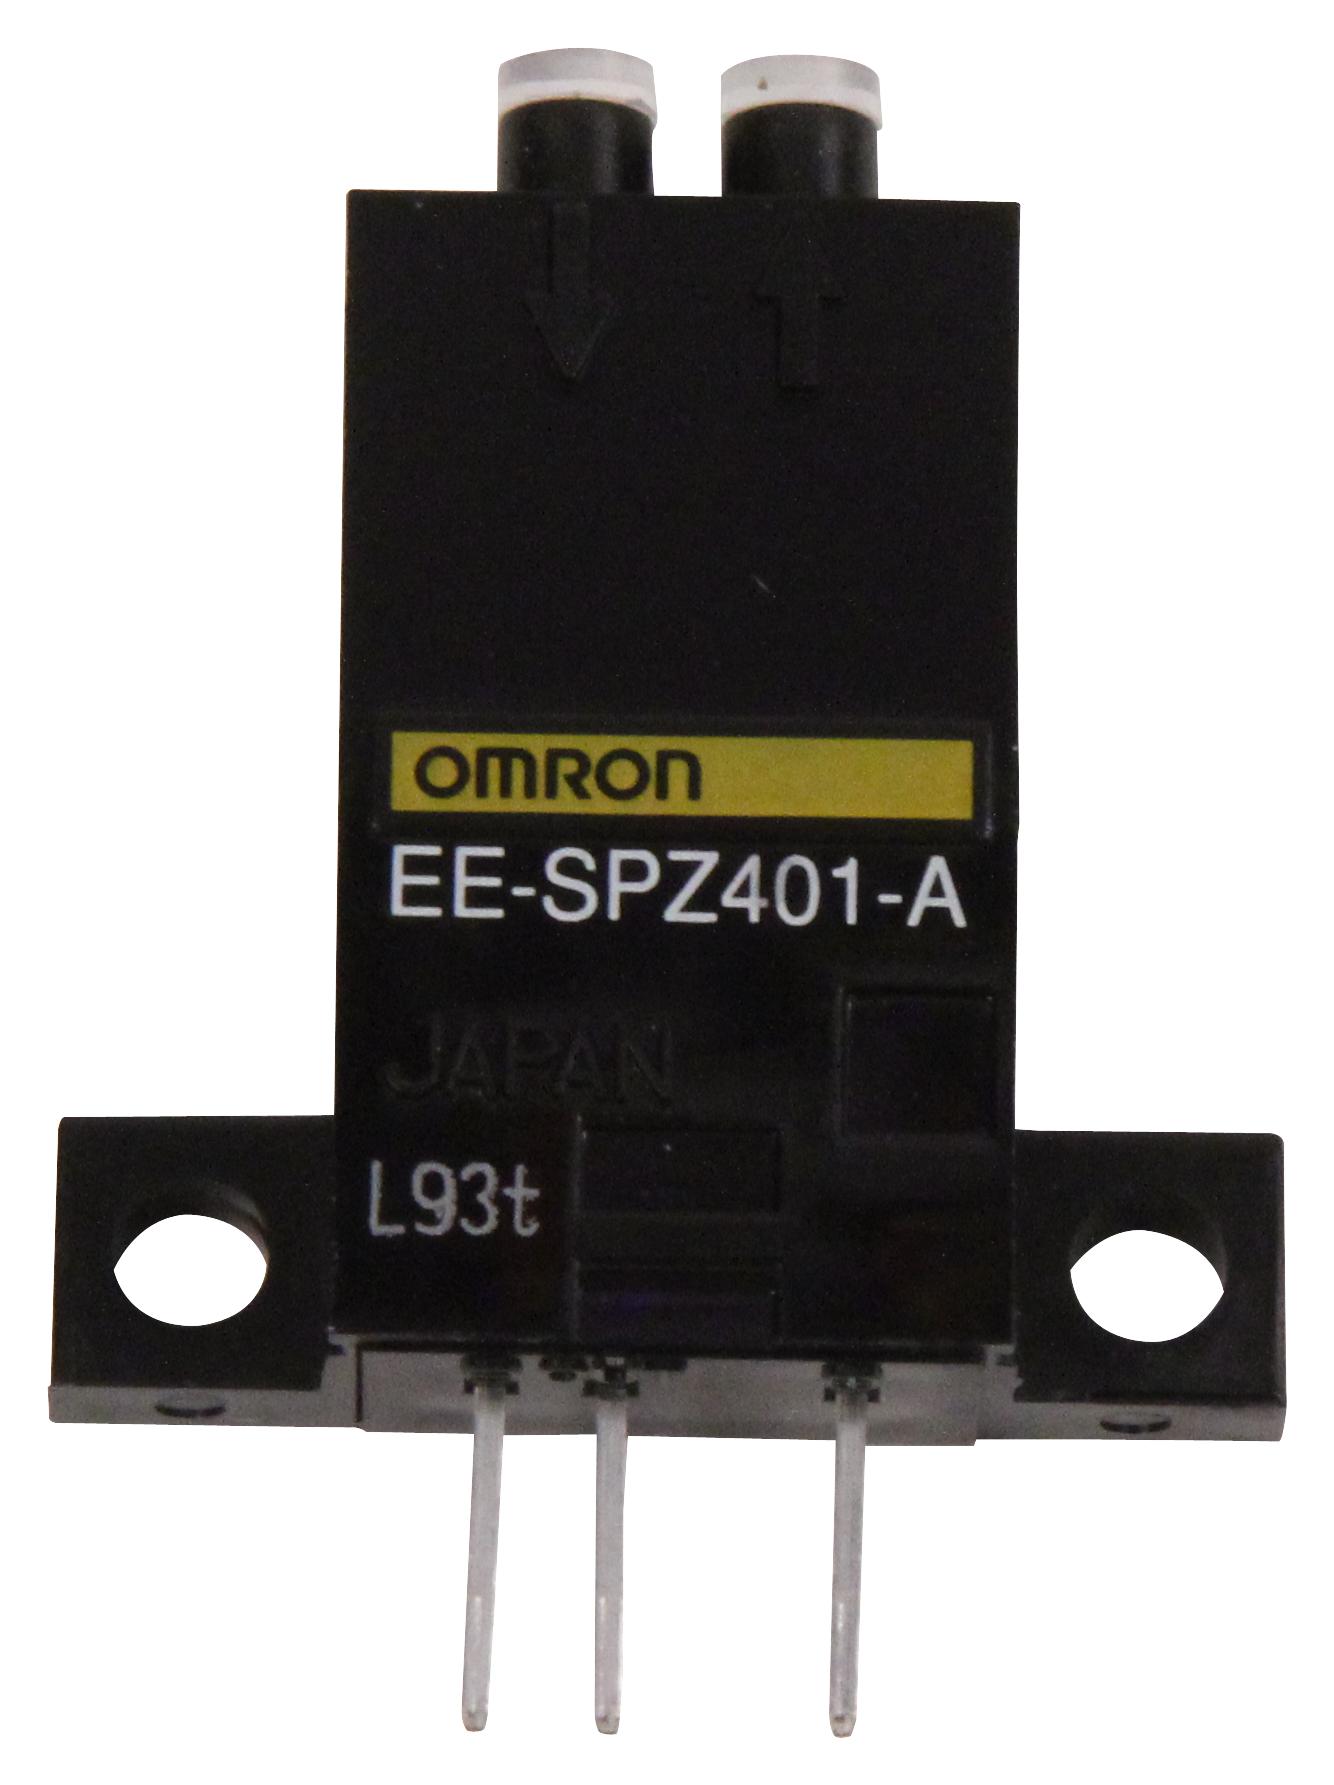 img EESPZ401A_OMRON-INDUSTRIAL-AUTOMATION.jpg